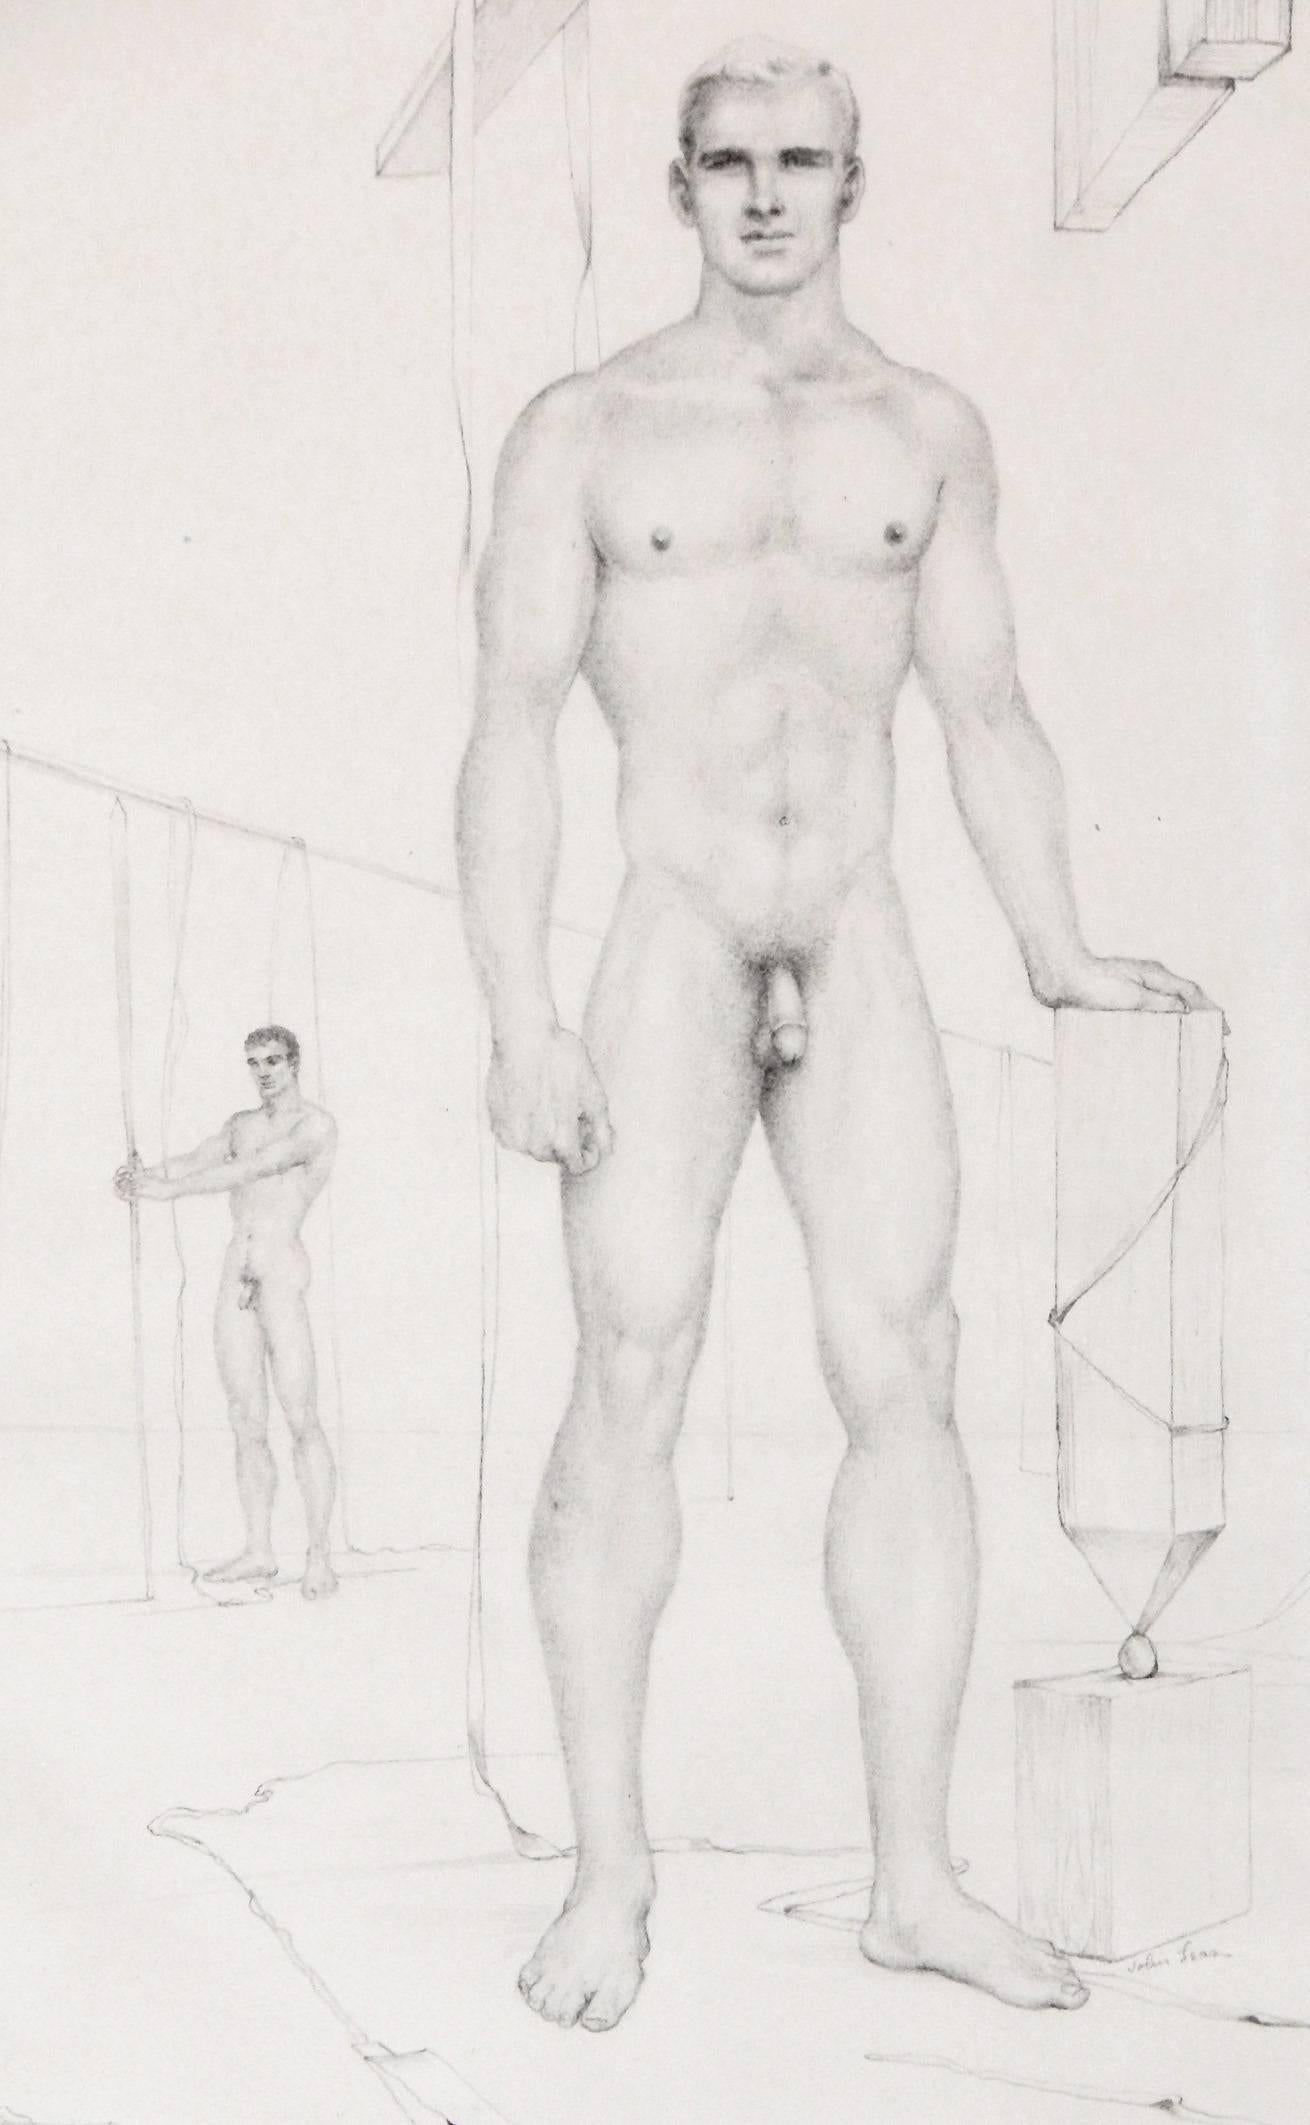 A contemporary of Paul Cadmus, and like him, highly focused on depicting the male figure in various settings and positions, John Lear never gained fame beyond his circle of admirers in the Philadelphia area. Unlike Cadmus, Lear depicted nude or